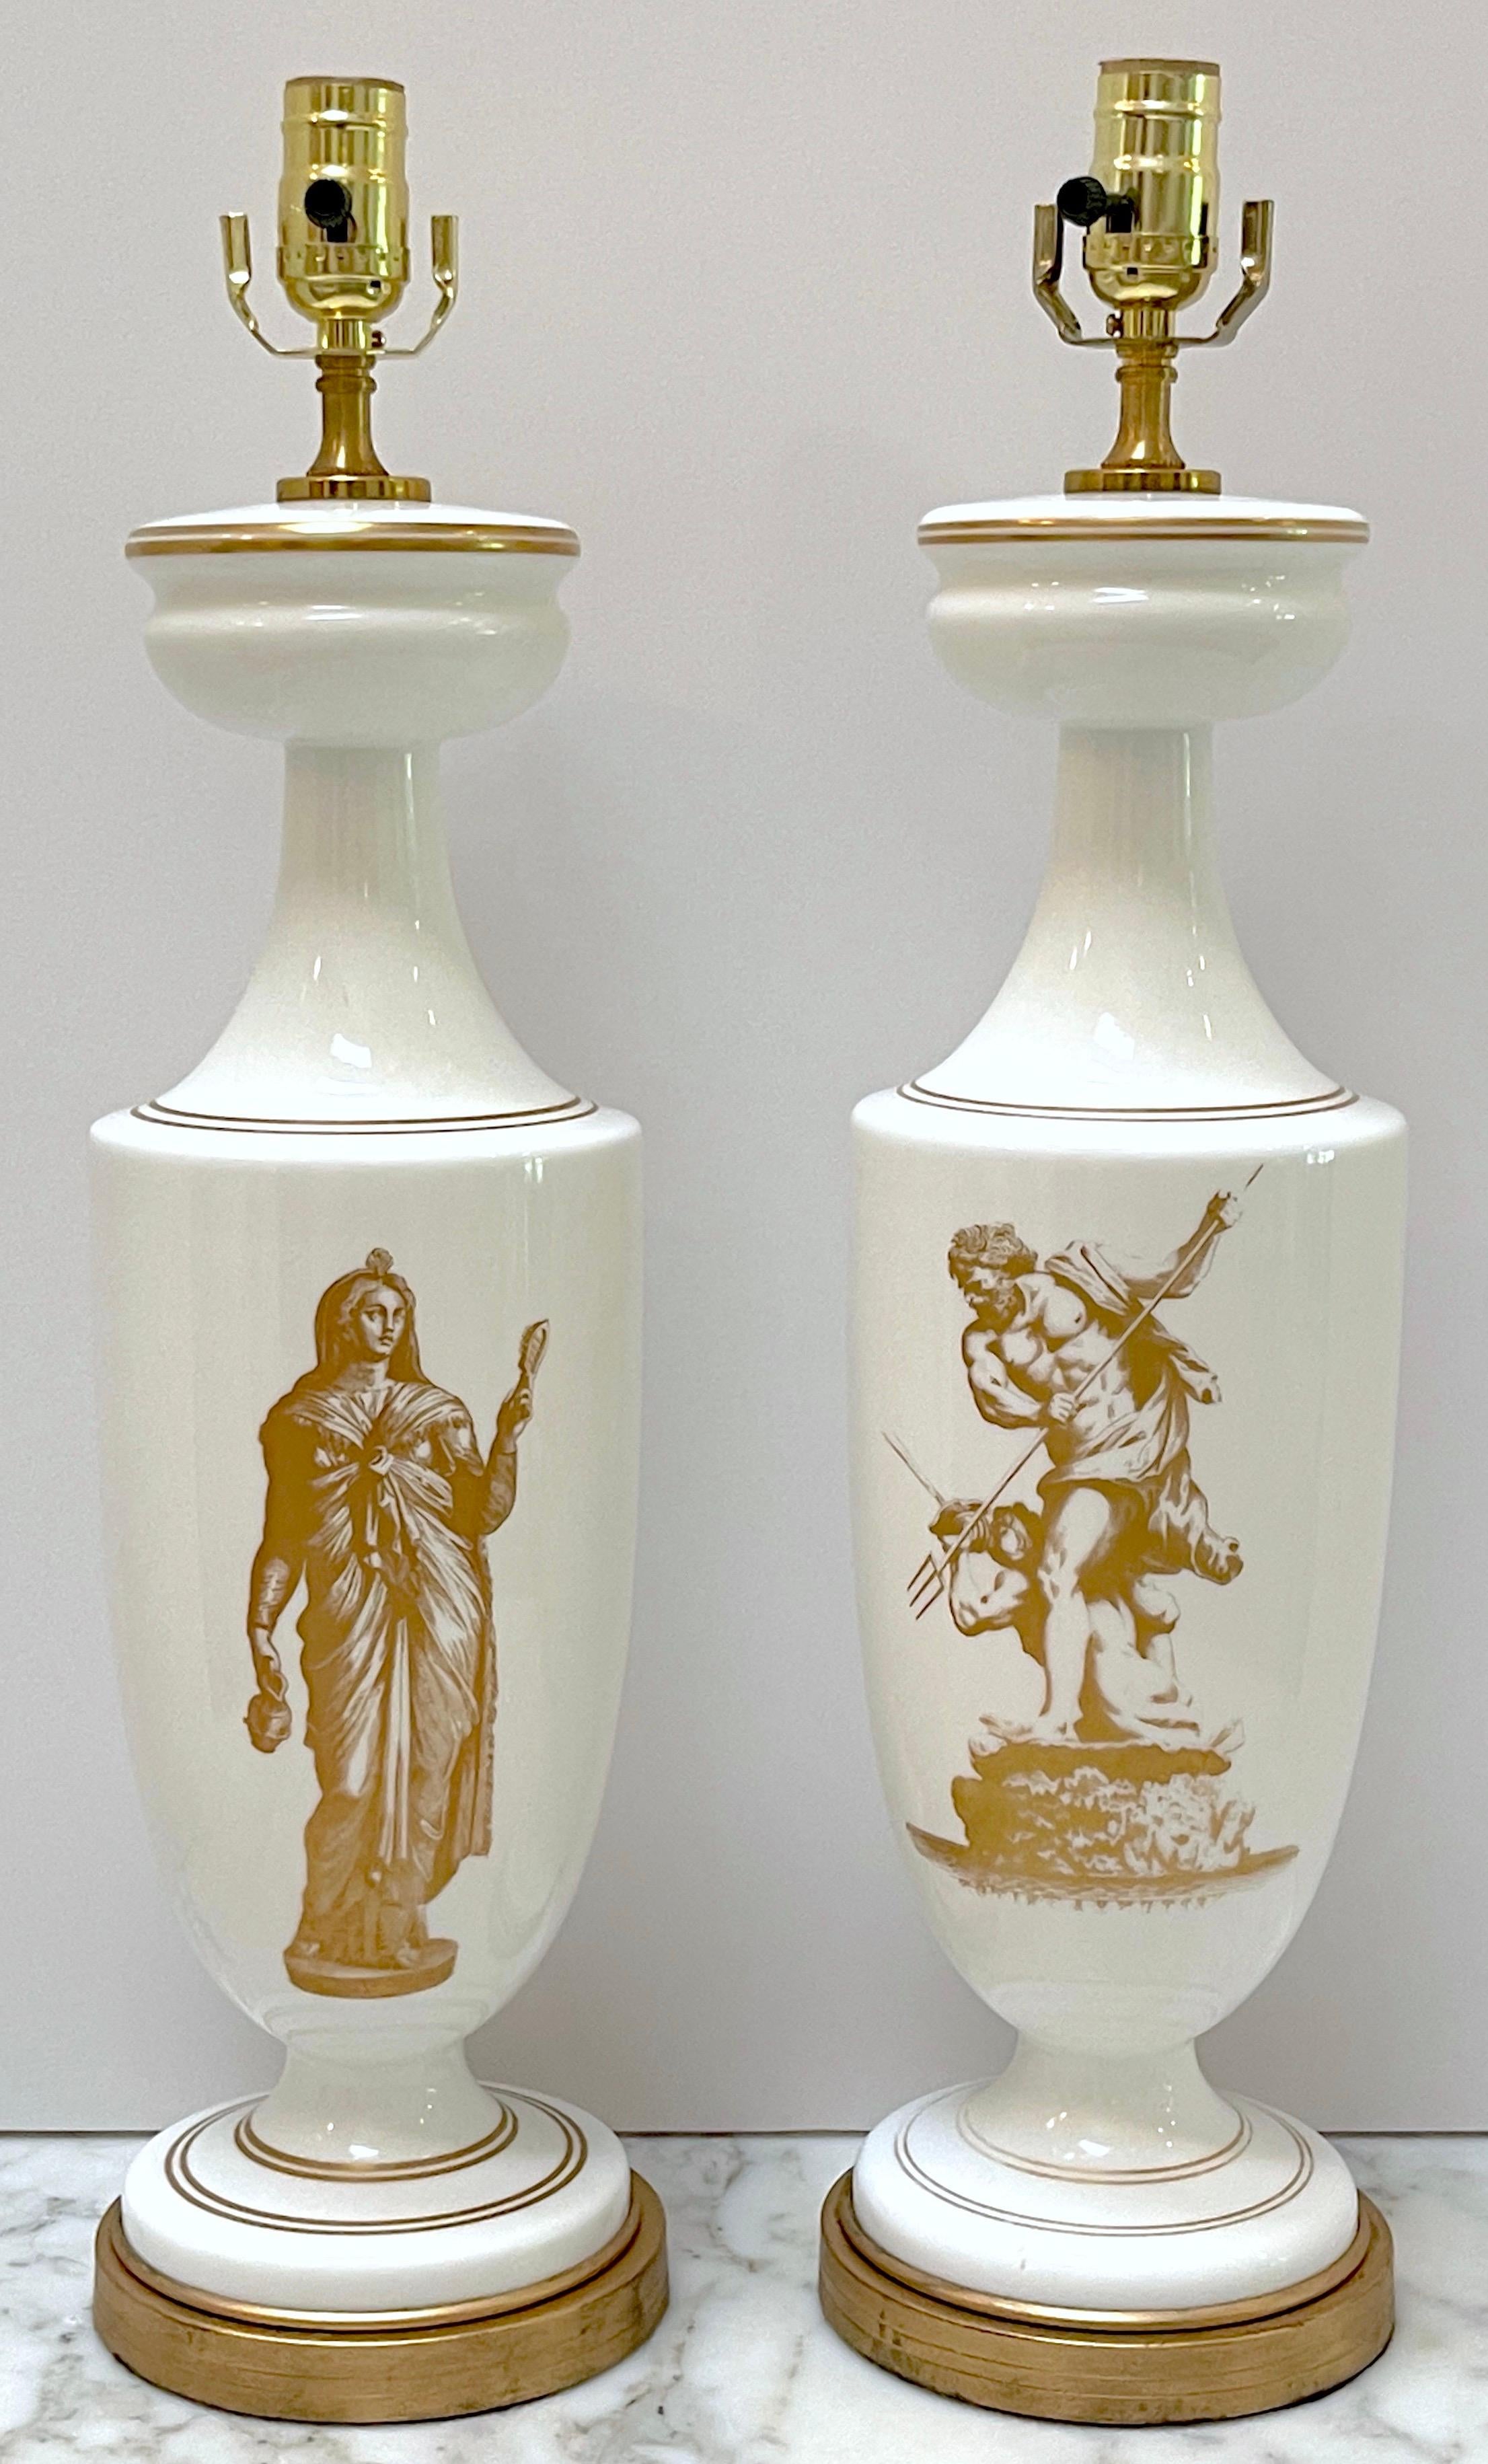 Pair of 19th C French Neoclassical Gilt Opaline Glass Lamps 'Venus & Neptune' 
The Vases, France, Later 19th Century - Lamped in the 20th century 

A truly stunning pair of French Neoclassical gilt opaline glass lamps, influenced by the Grand Tour